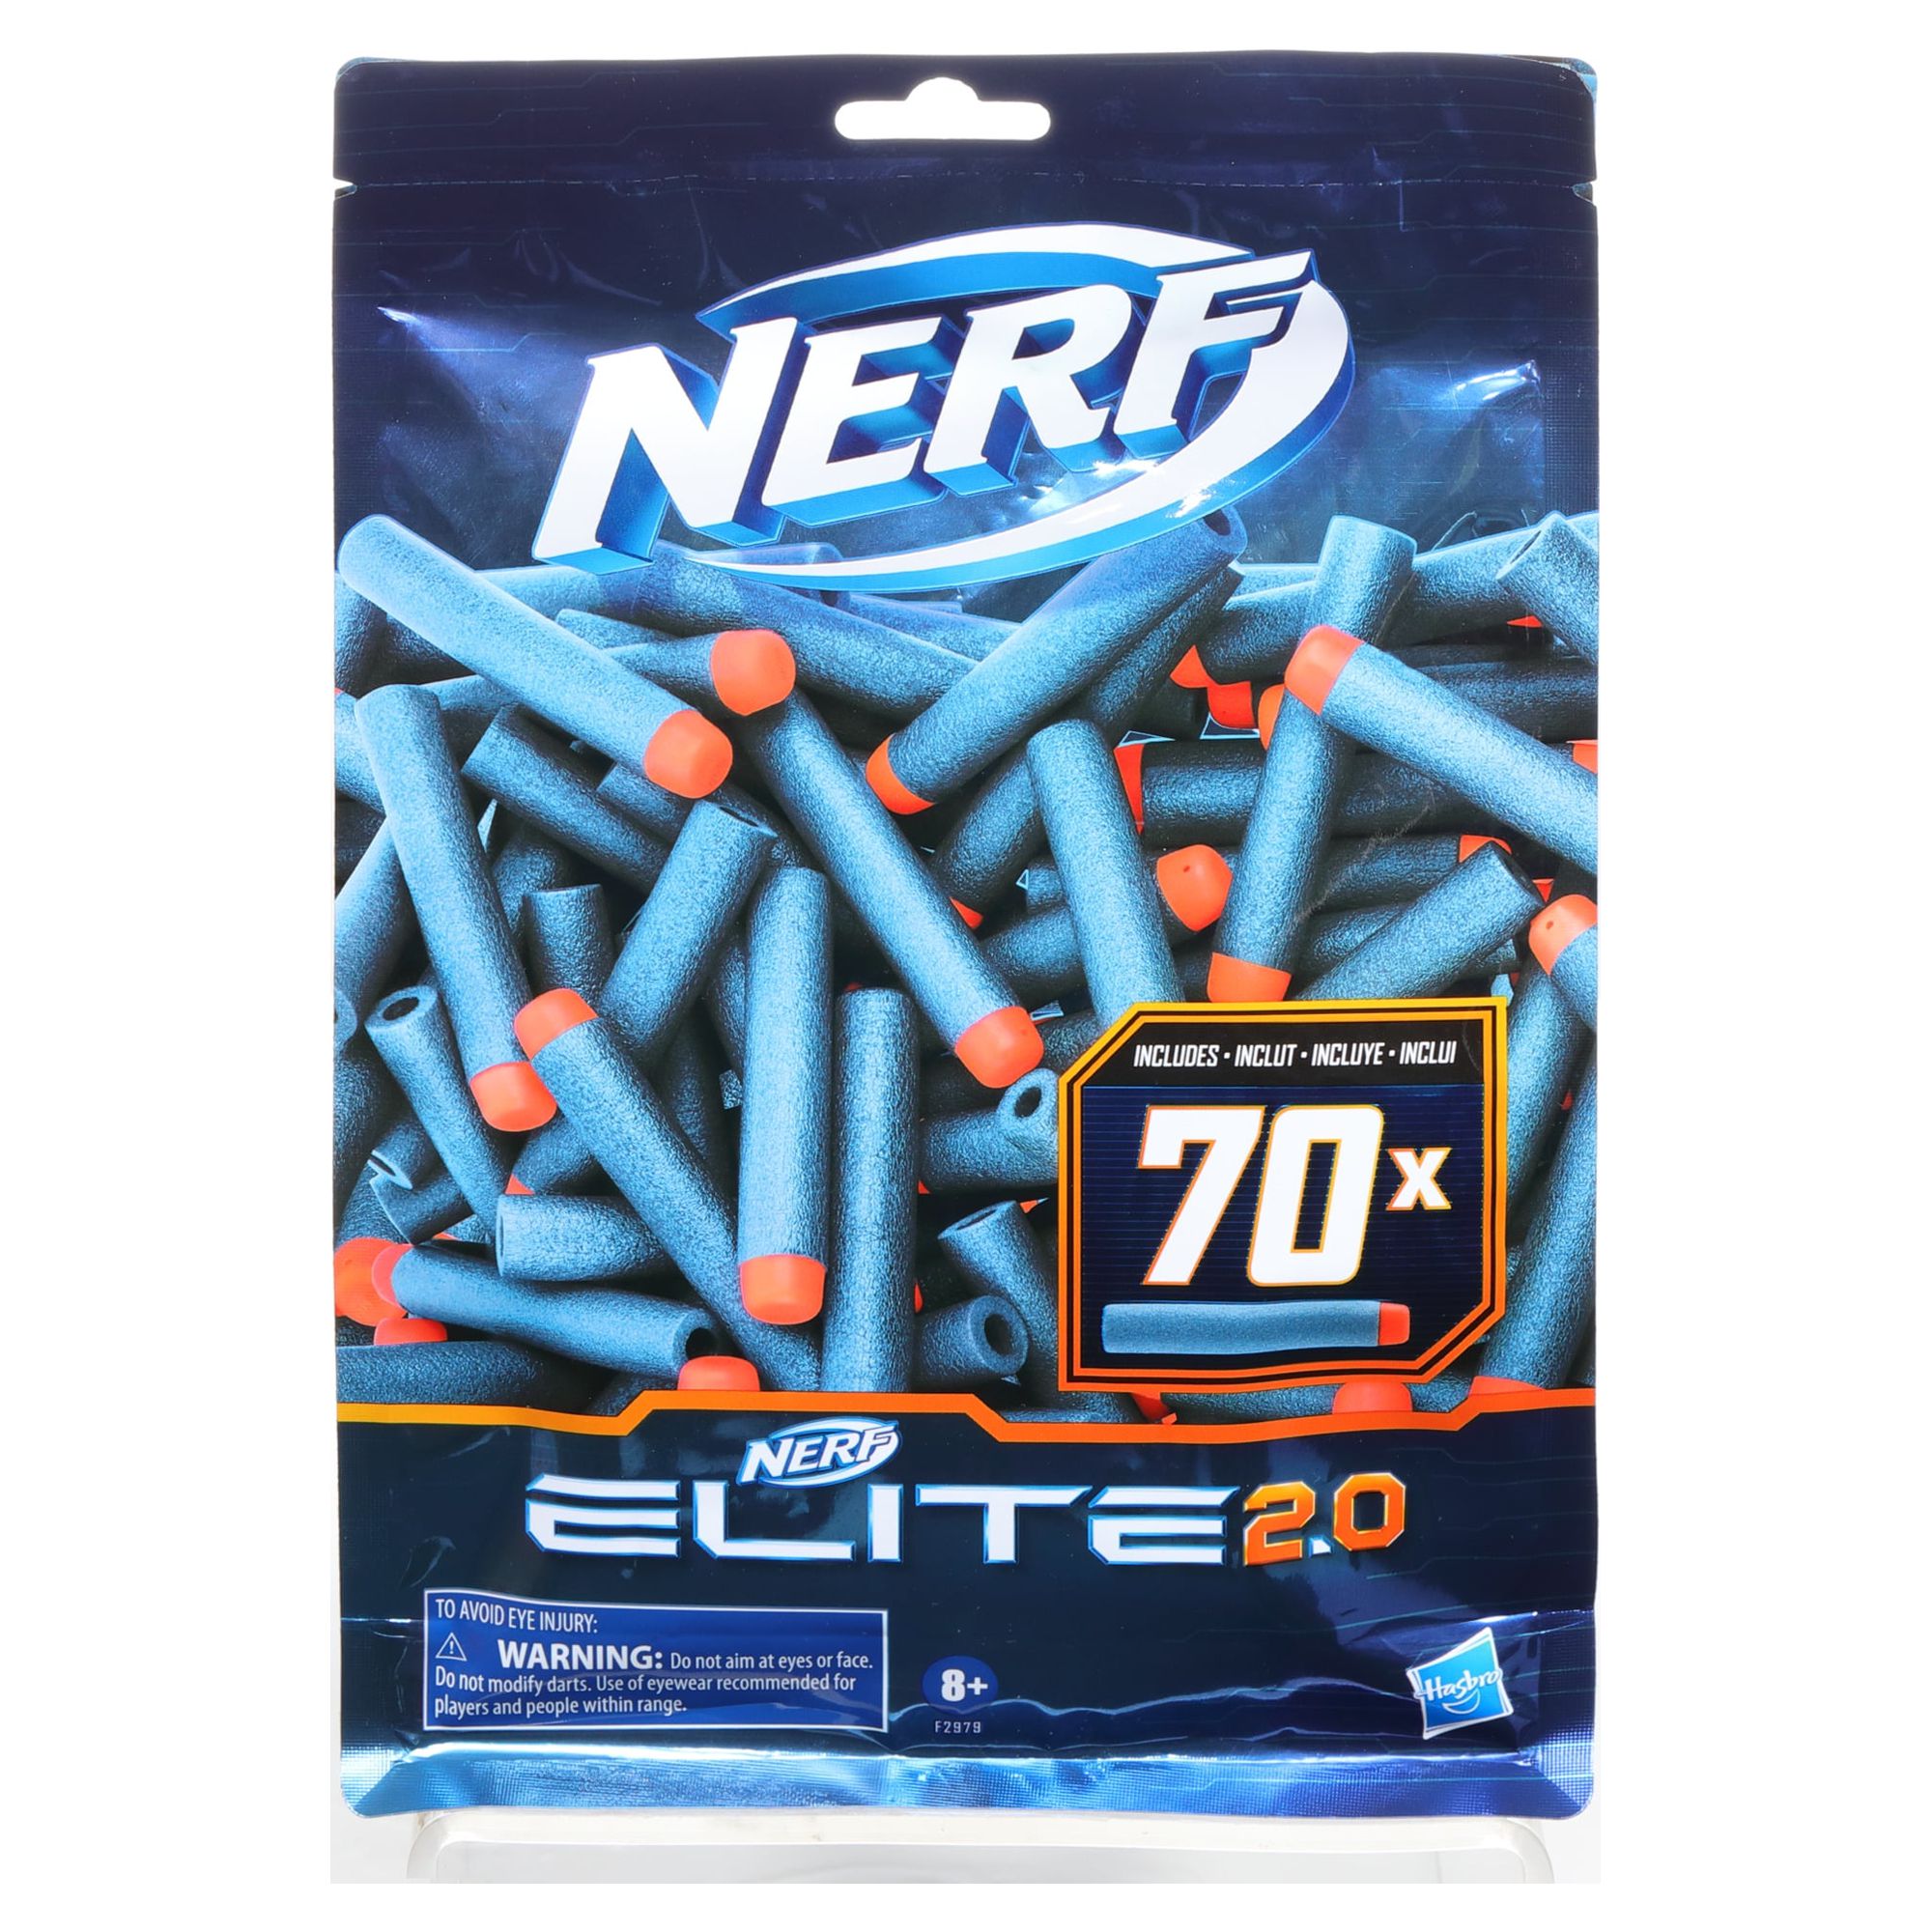 Nerf Elite 2.0 Kids Toy Blaster Refill Pack with 70 Darts, Only At Walmart - image 2 of 4